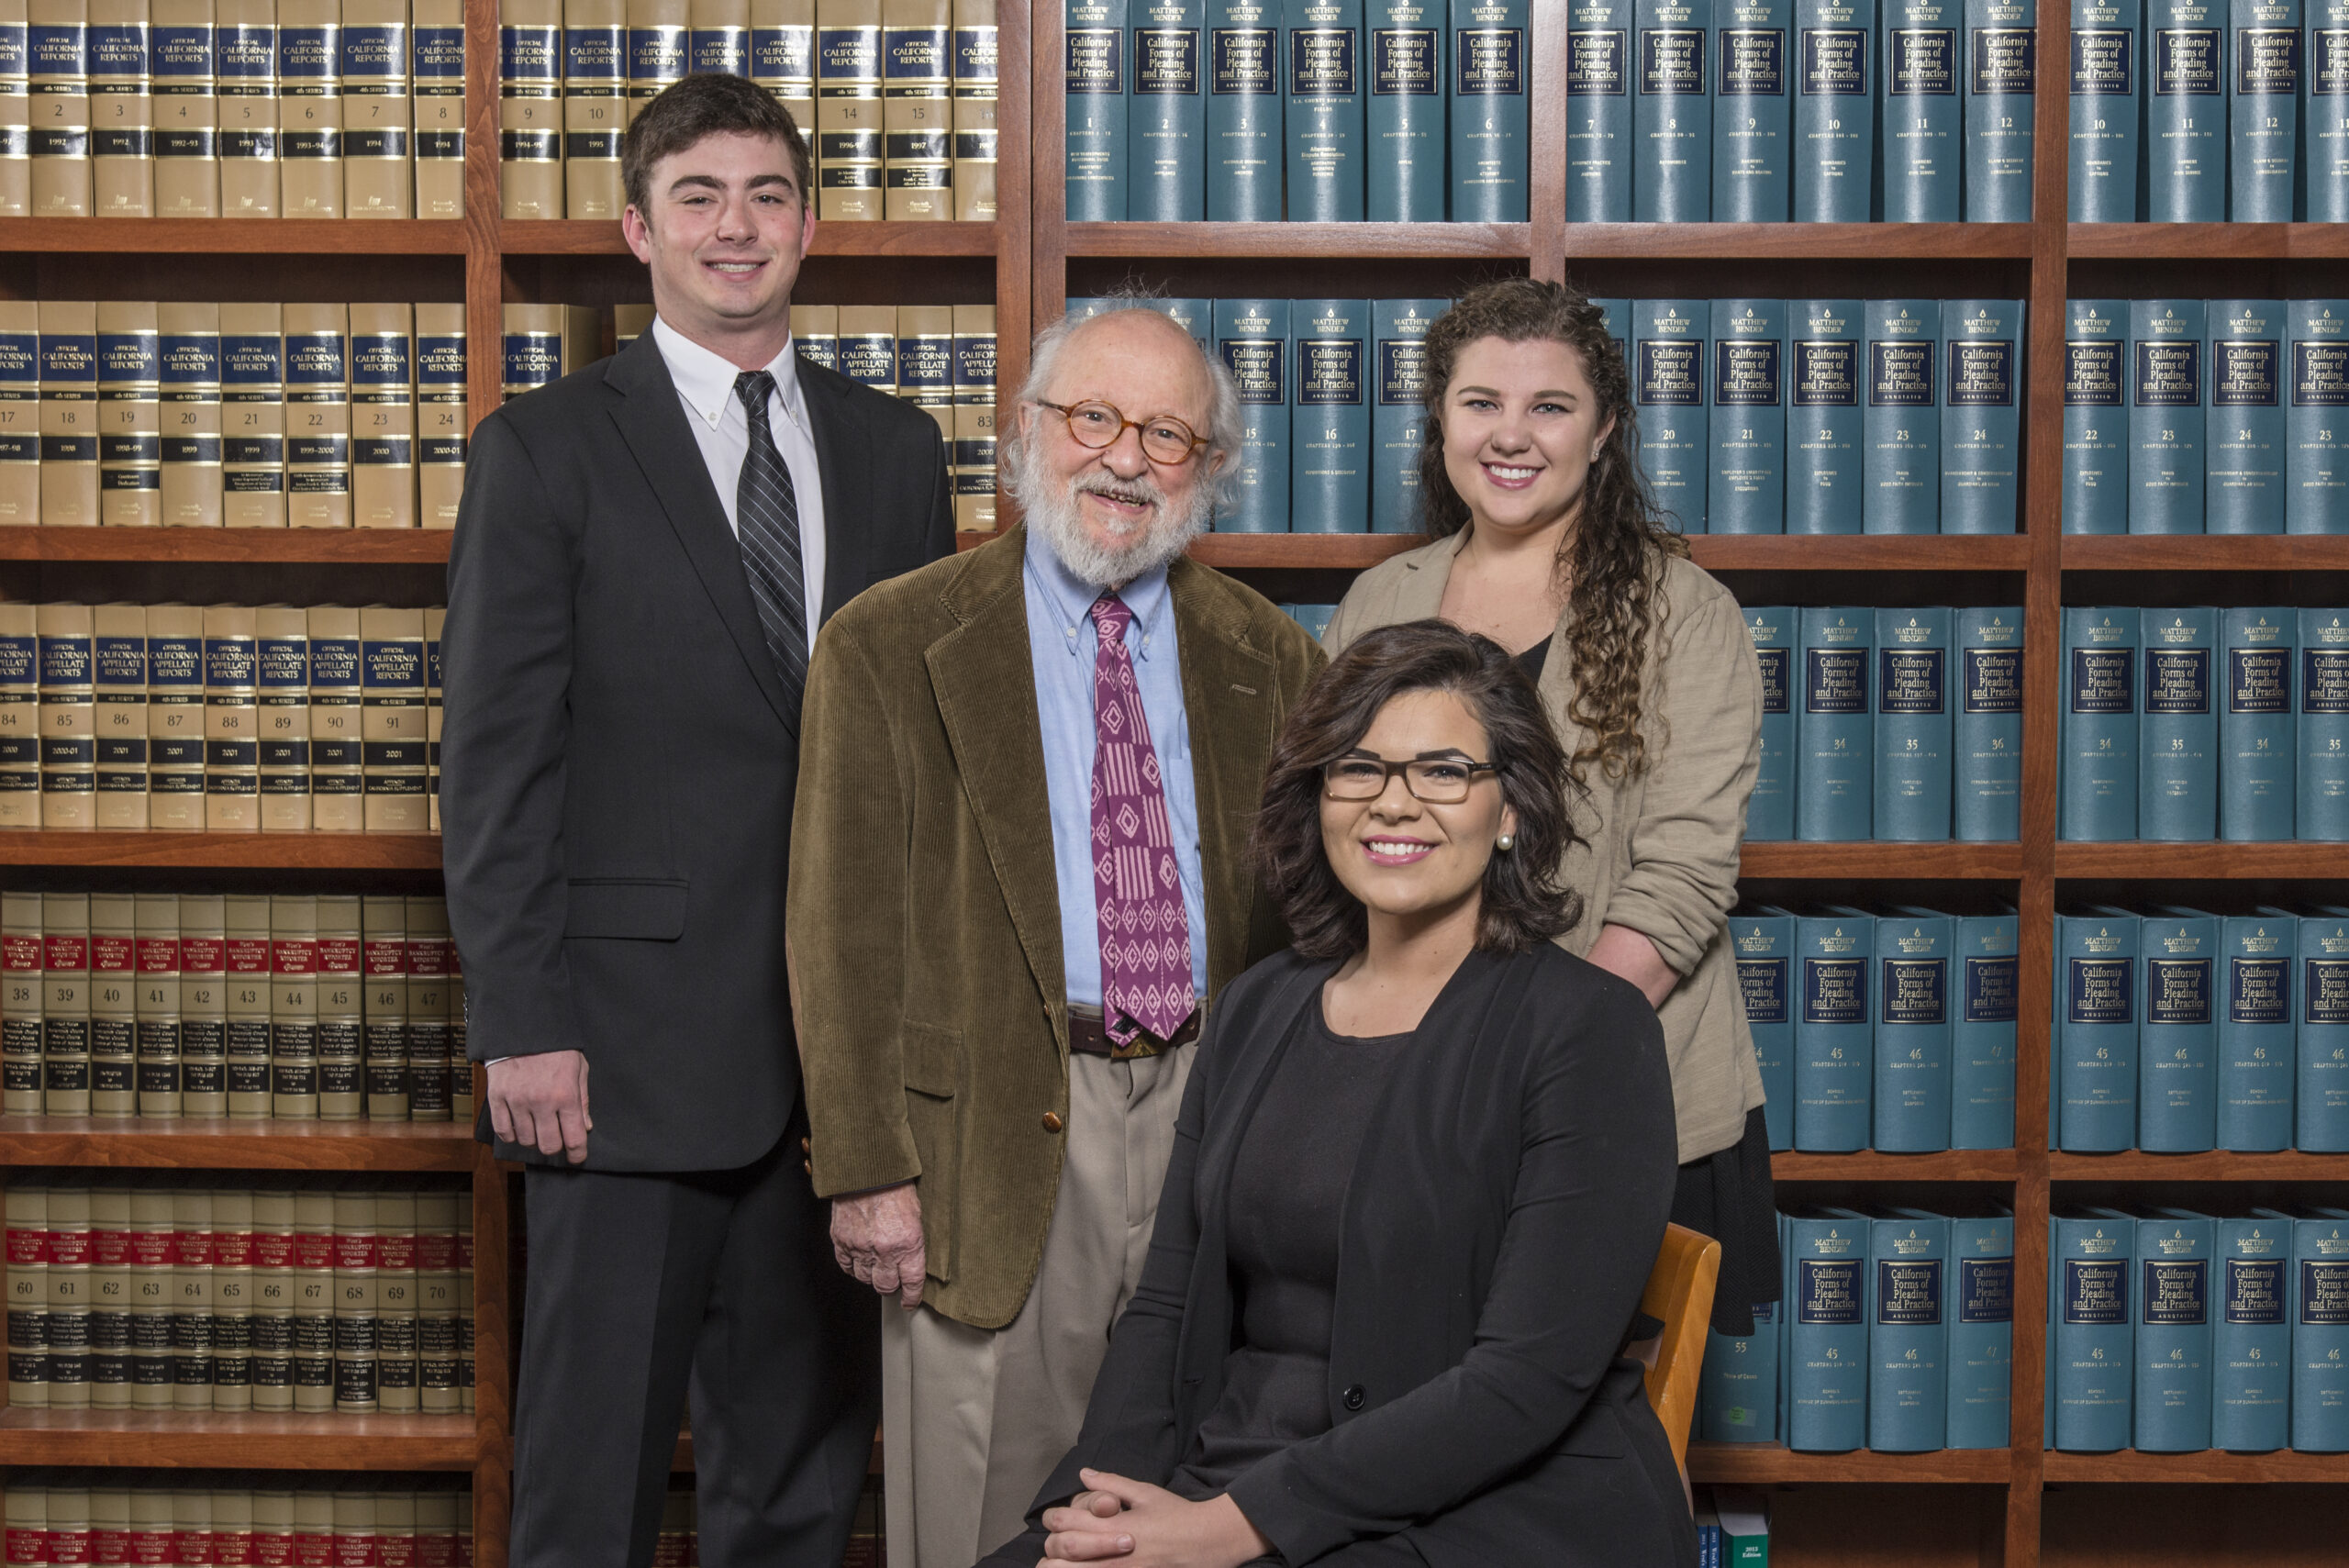 Program founder Edward Bronson with students who run the legal clinic, pictured behind legal text books.